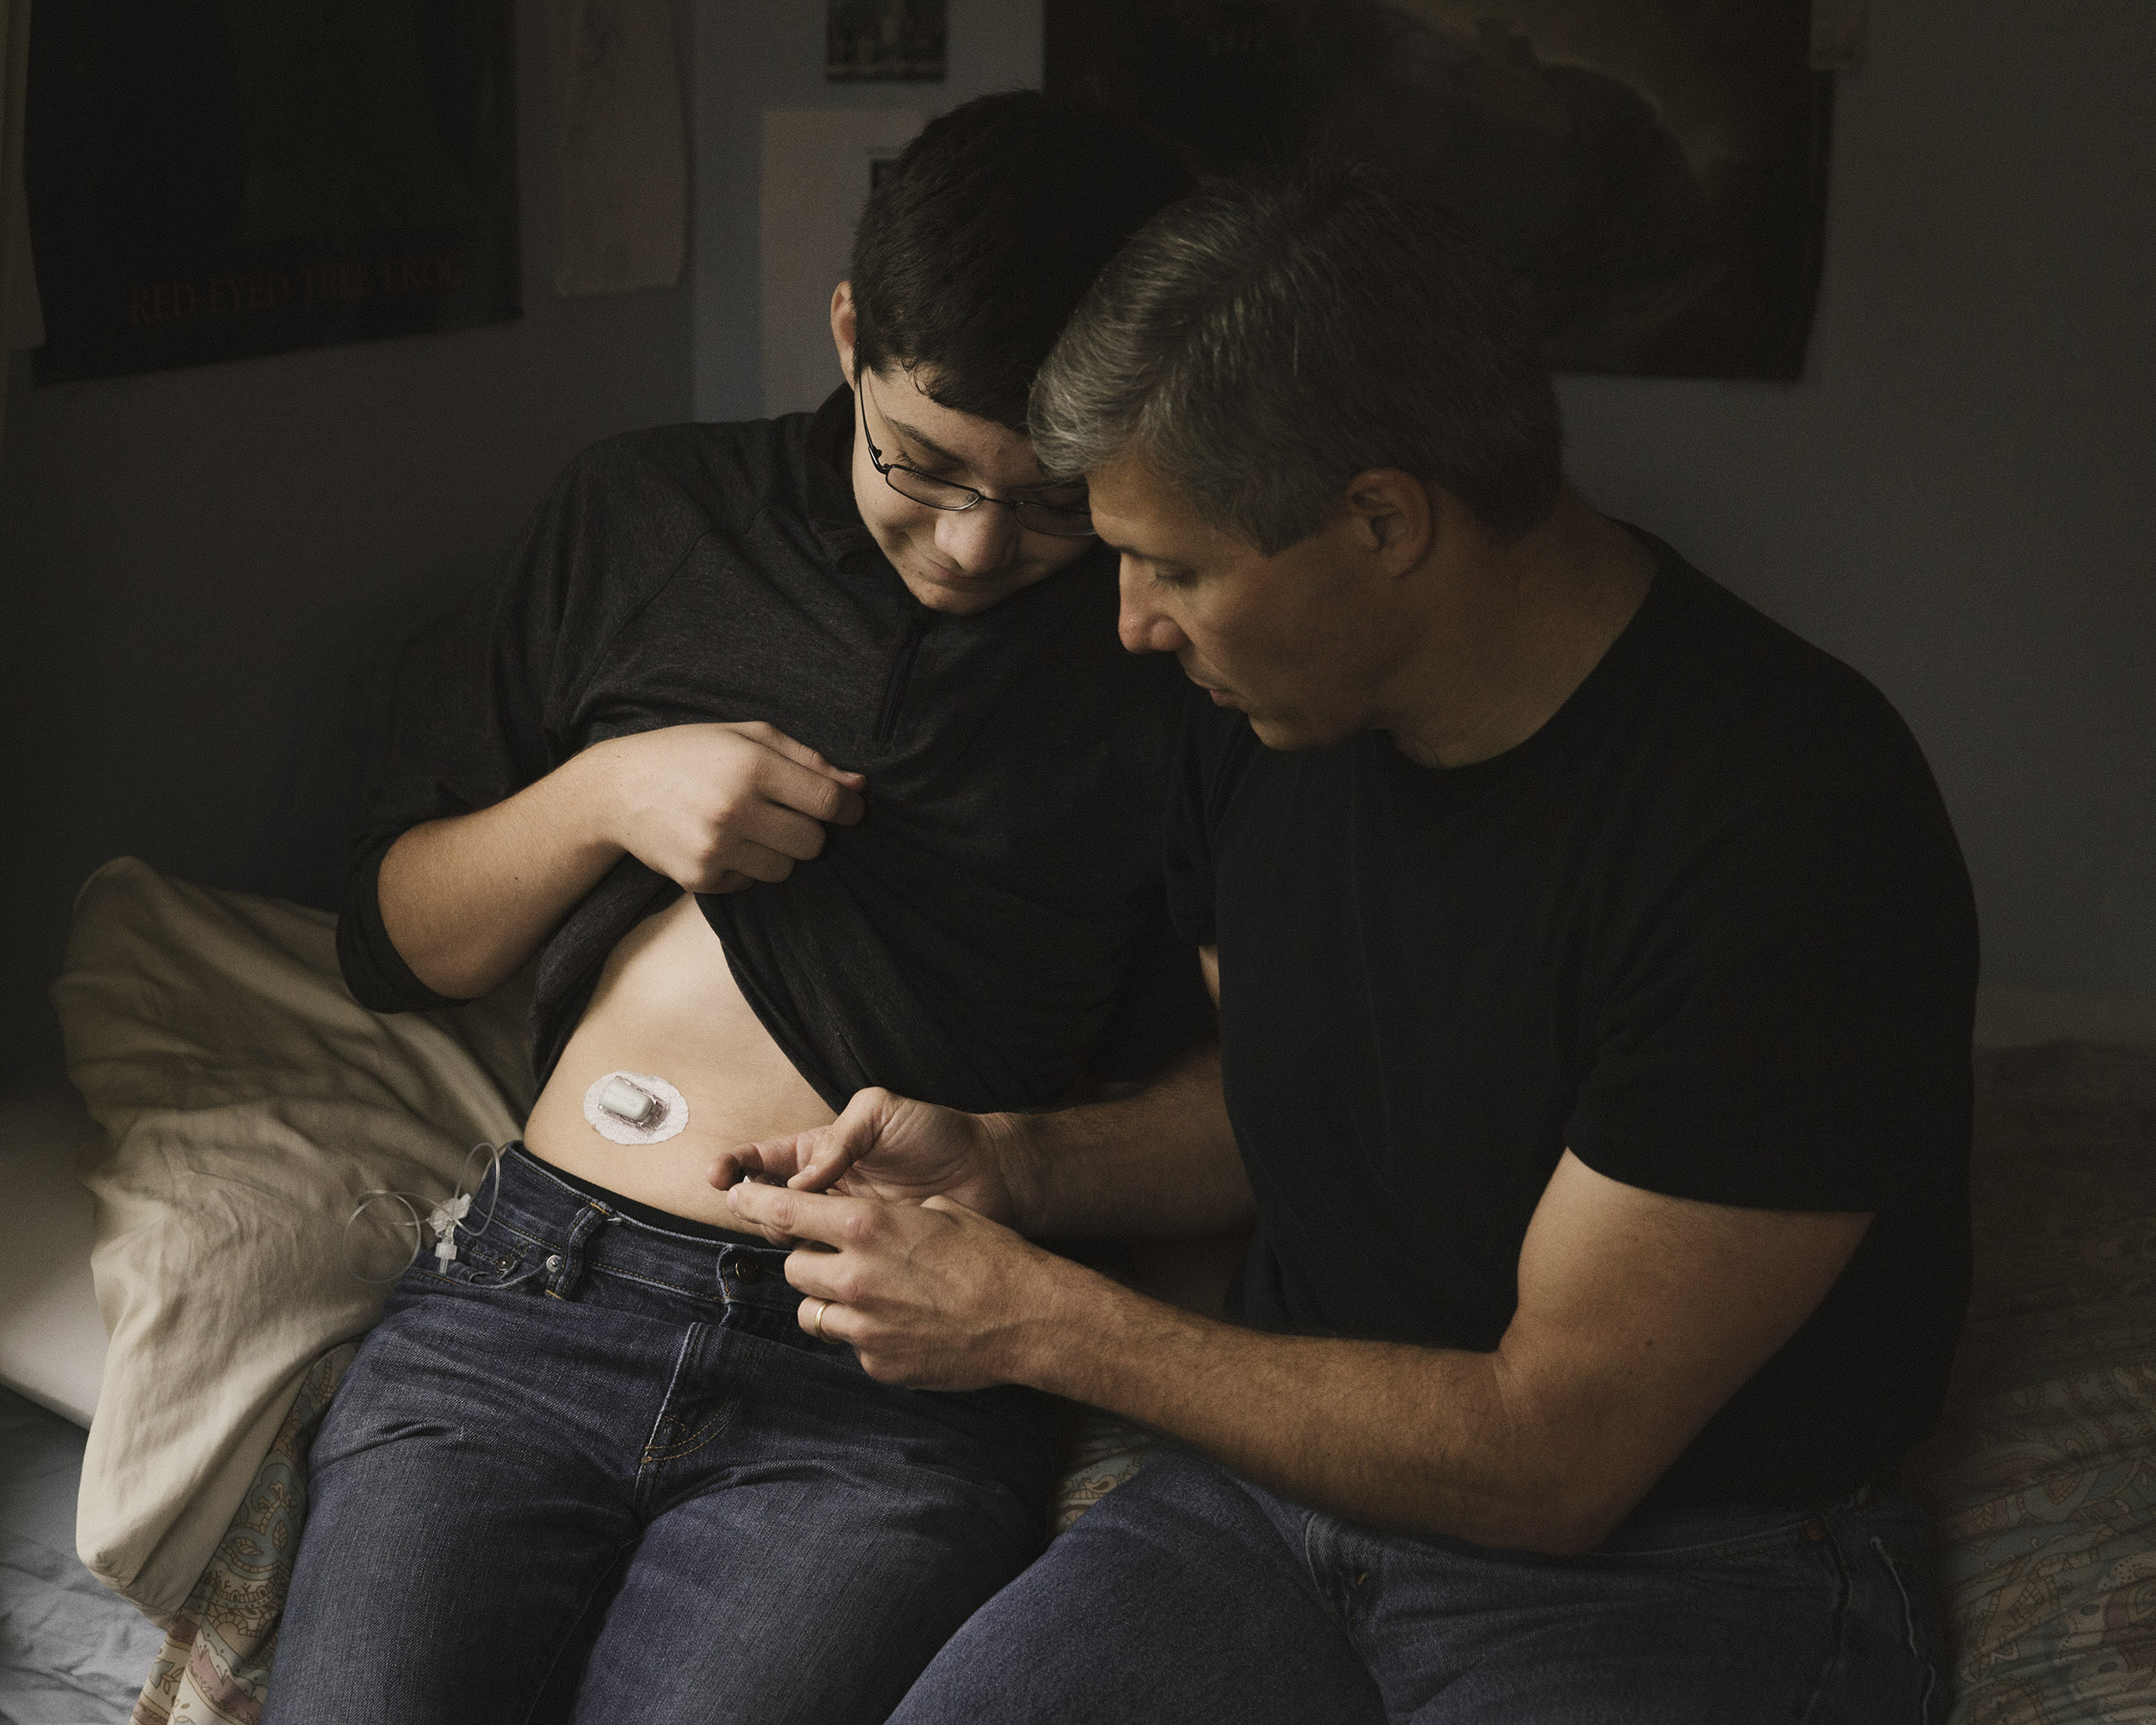 The inventor of the device, Ed Damiano, with his diabetic son David (Photograph by Daniel Shea for TIME)